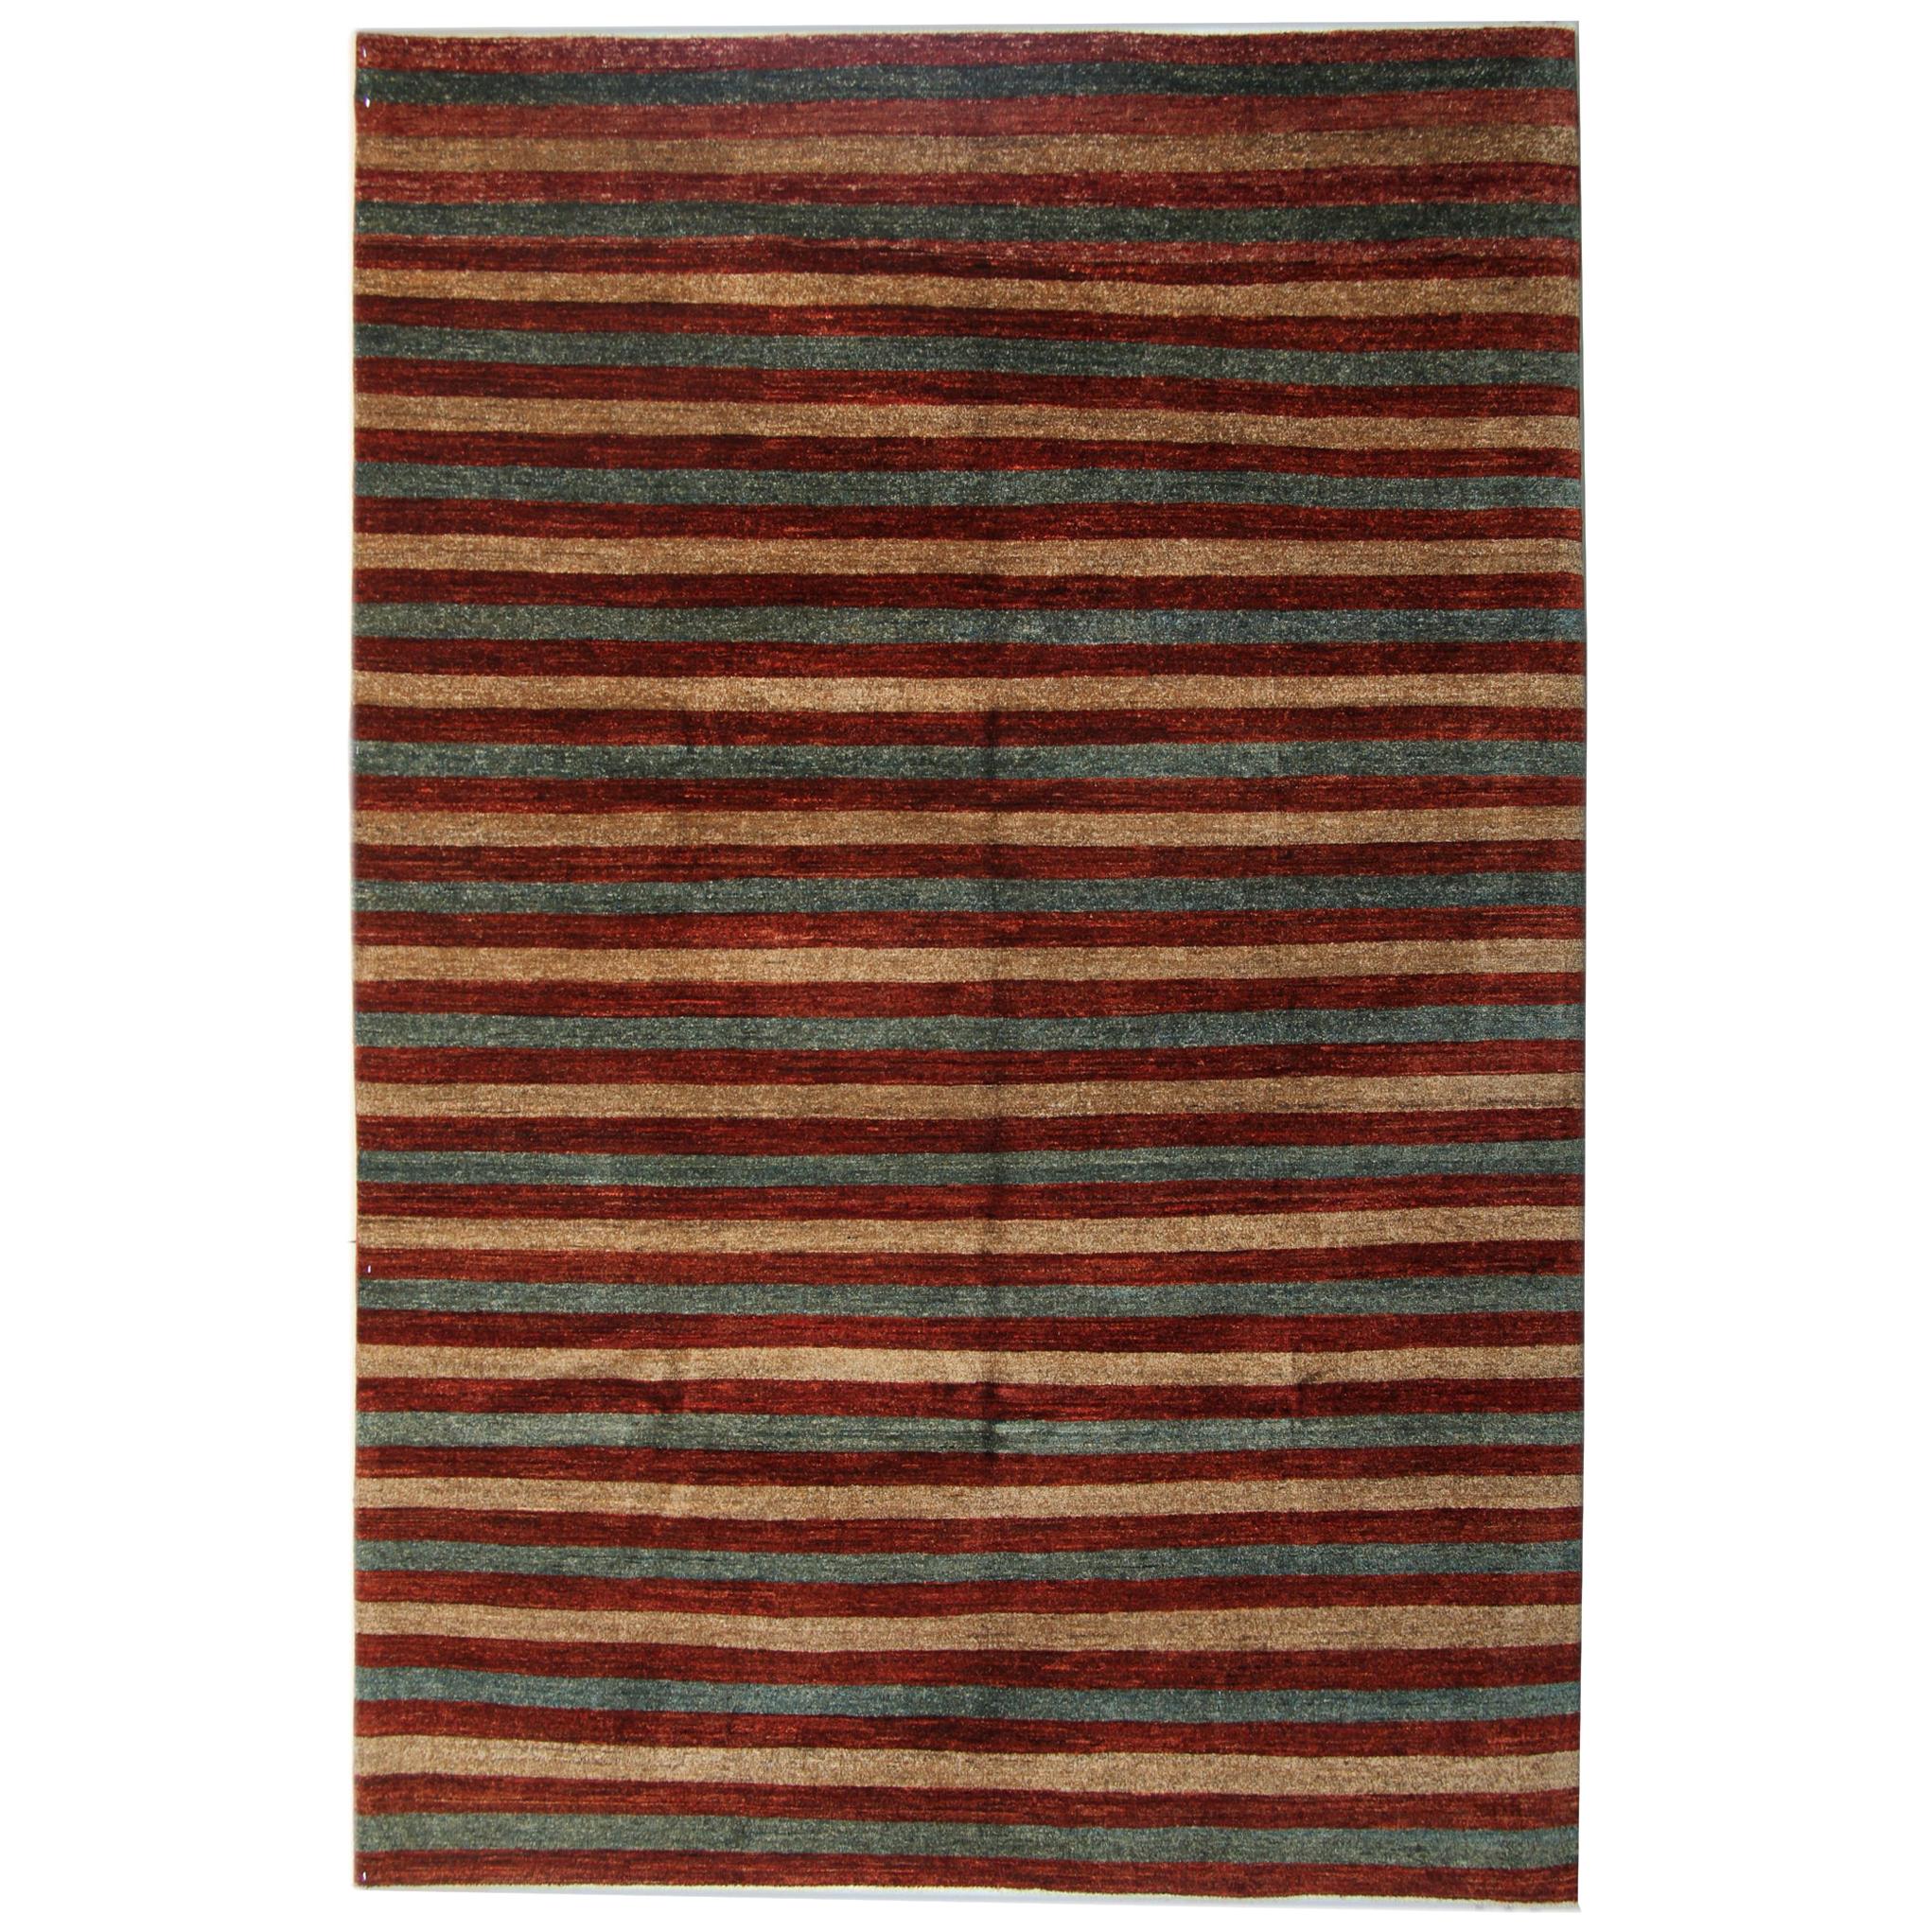 Modern Striped Rug Contemporary Oriental Rugs, Handwoven Carpet for Sale